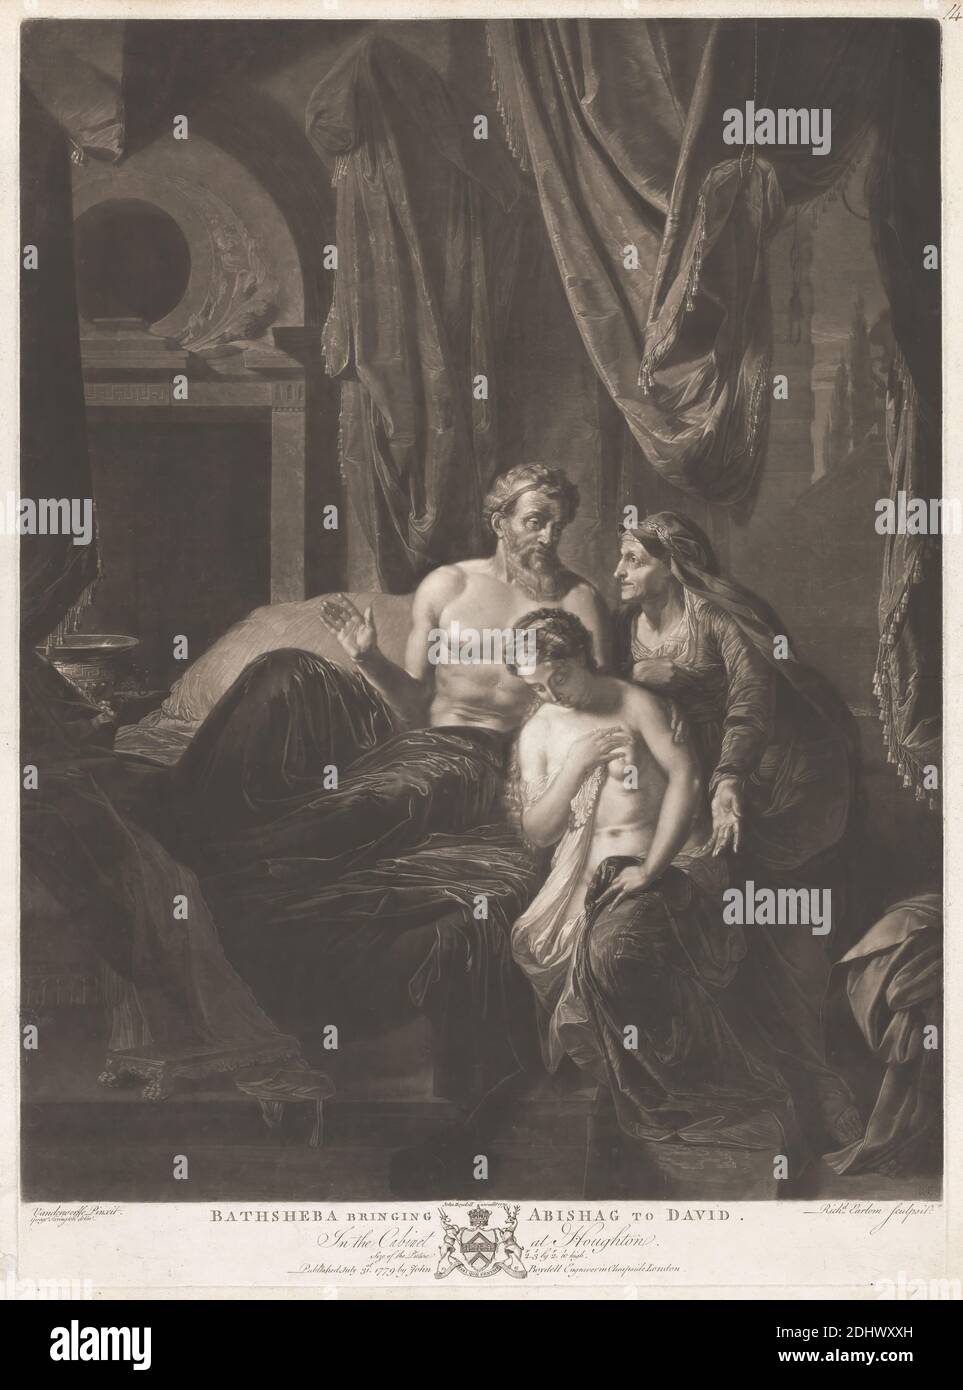 Bathsheba Bringing Abishag to David, Print made by Richard Earlom, 1743–1822, British, after Adriaan van der Werff, 1659–1722, Dutch, 1779, Mezzotint and etching on medium, slightly textured, cream laid paper, Sheet: 25 5/8 × 19 3/8 inches (65.1 × 49.2 cm), Plate: 24 7/8 × 18 1/8 inches (63.2 × 46 cm), and Image: 23 1/8 × 18 inches (58.7 × 45.7 cm), bed, canopy, caretaker, Christianity, conversation, elderly, influencing, Judaism, Old Testament, power, religious and mythological subject, virgin, wife Stock Photo